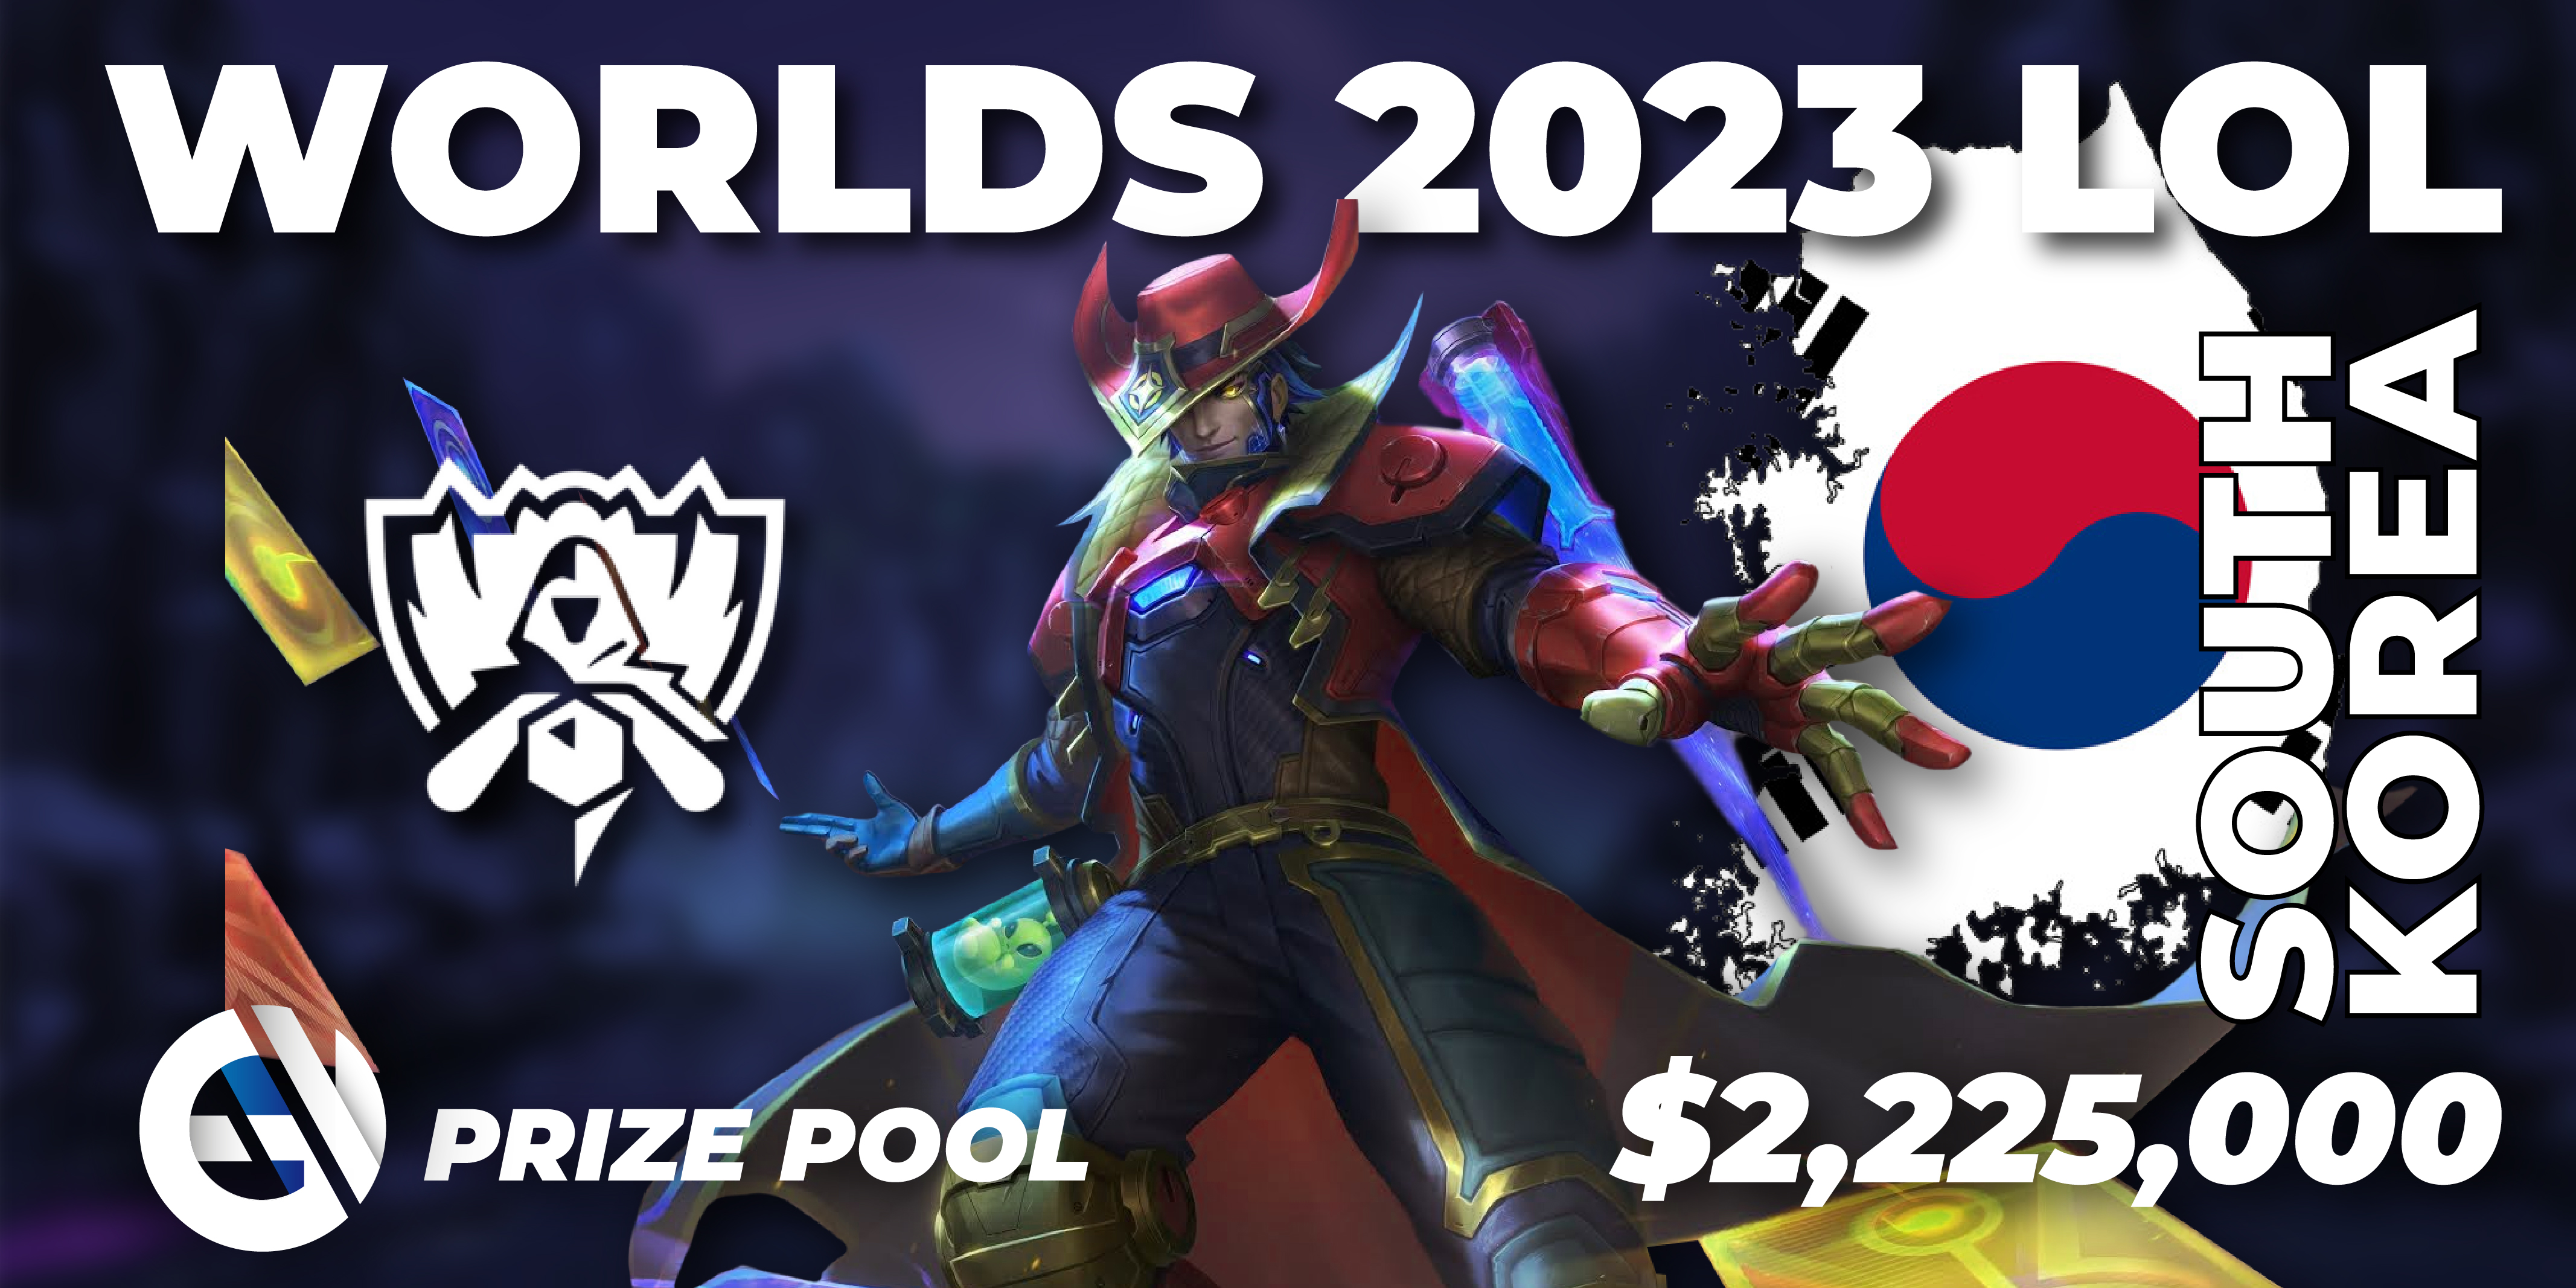 Worlds 2023 LoL: Format, Teams, Schedule & Results